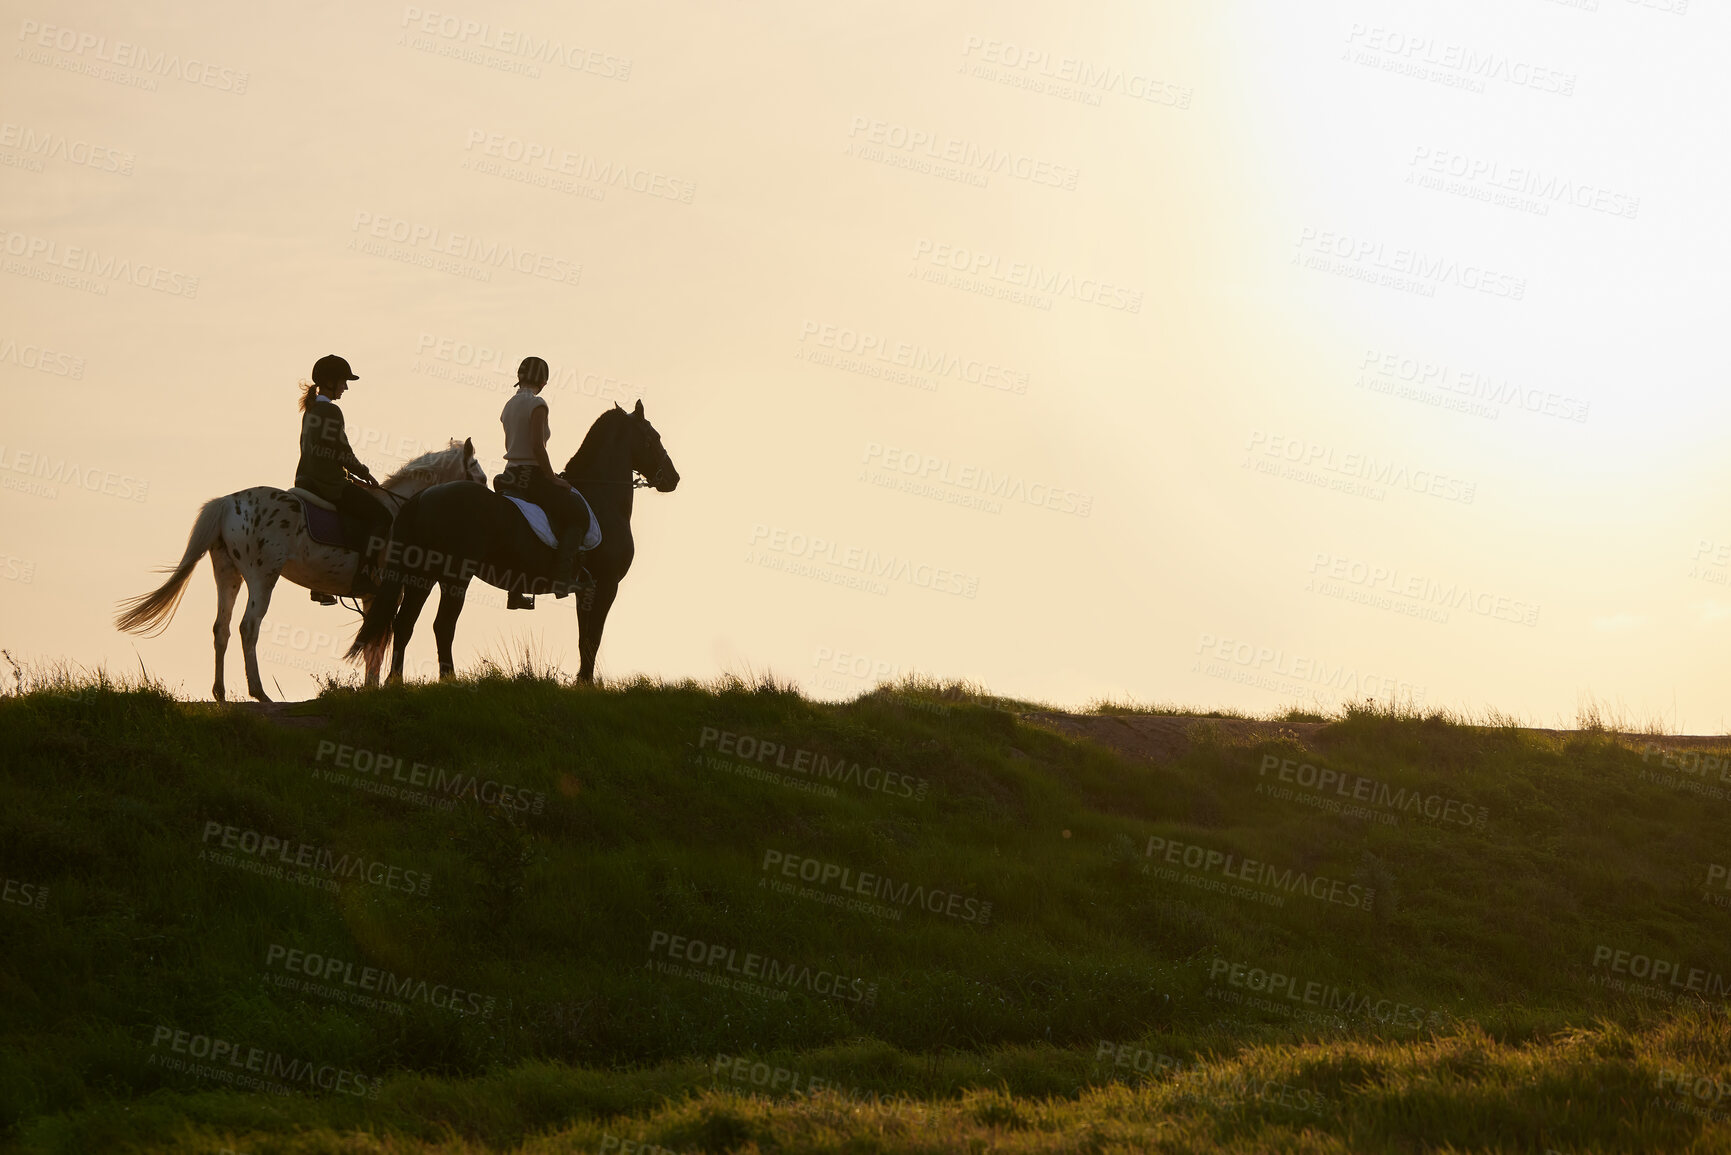 Buy stock photo Shot of two unrecognizable women riding their horses outside on a field